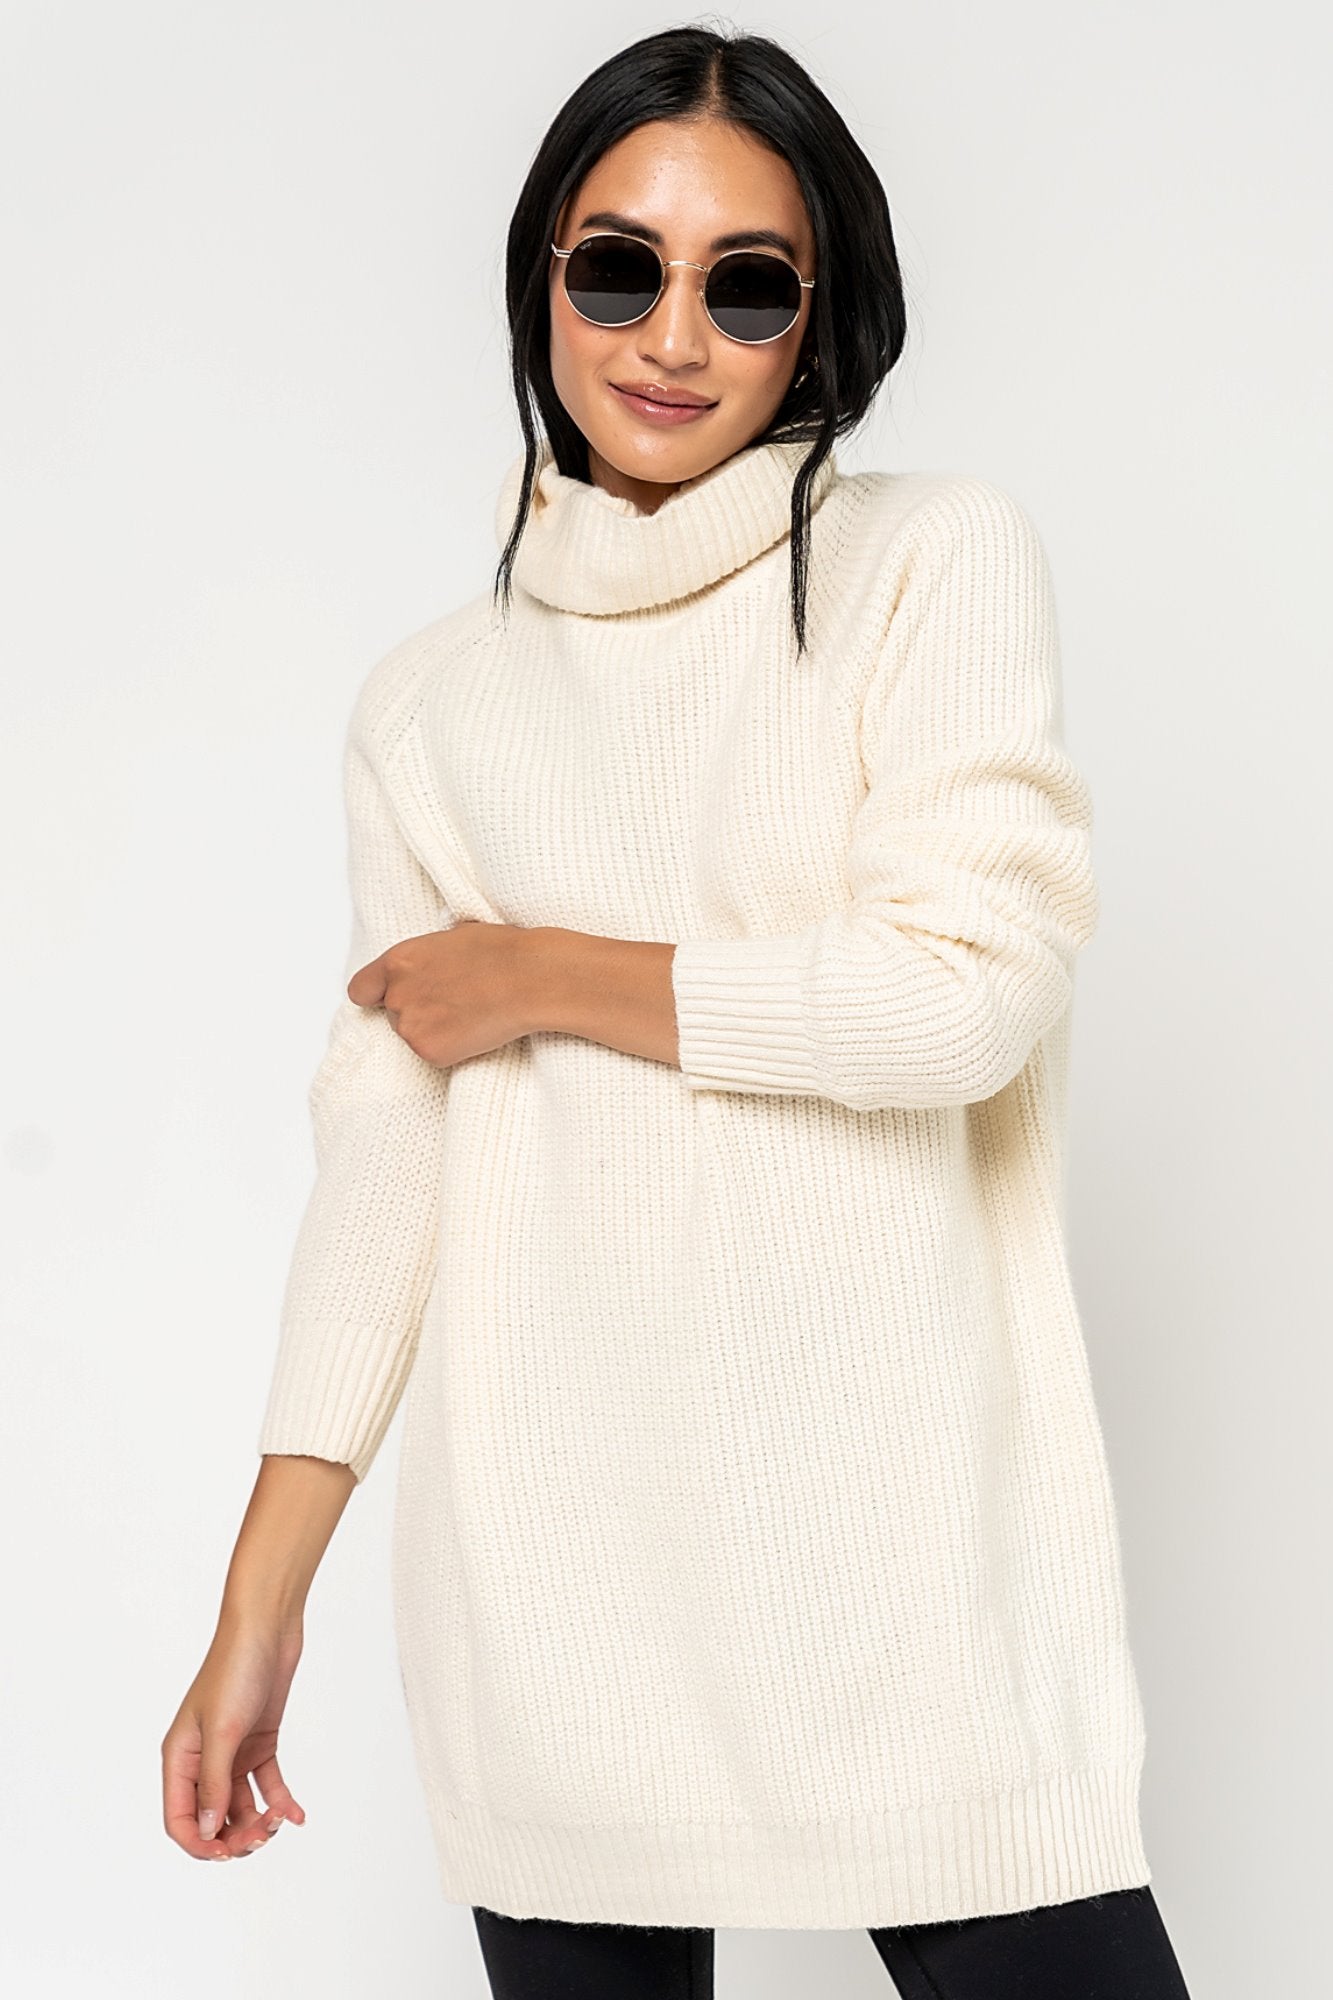 Windsor Sweater (Small-3XL) - FINAL SALE – Holley Girl